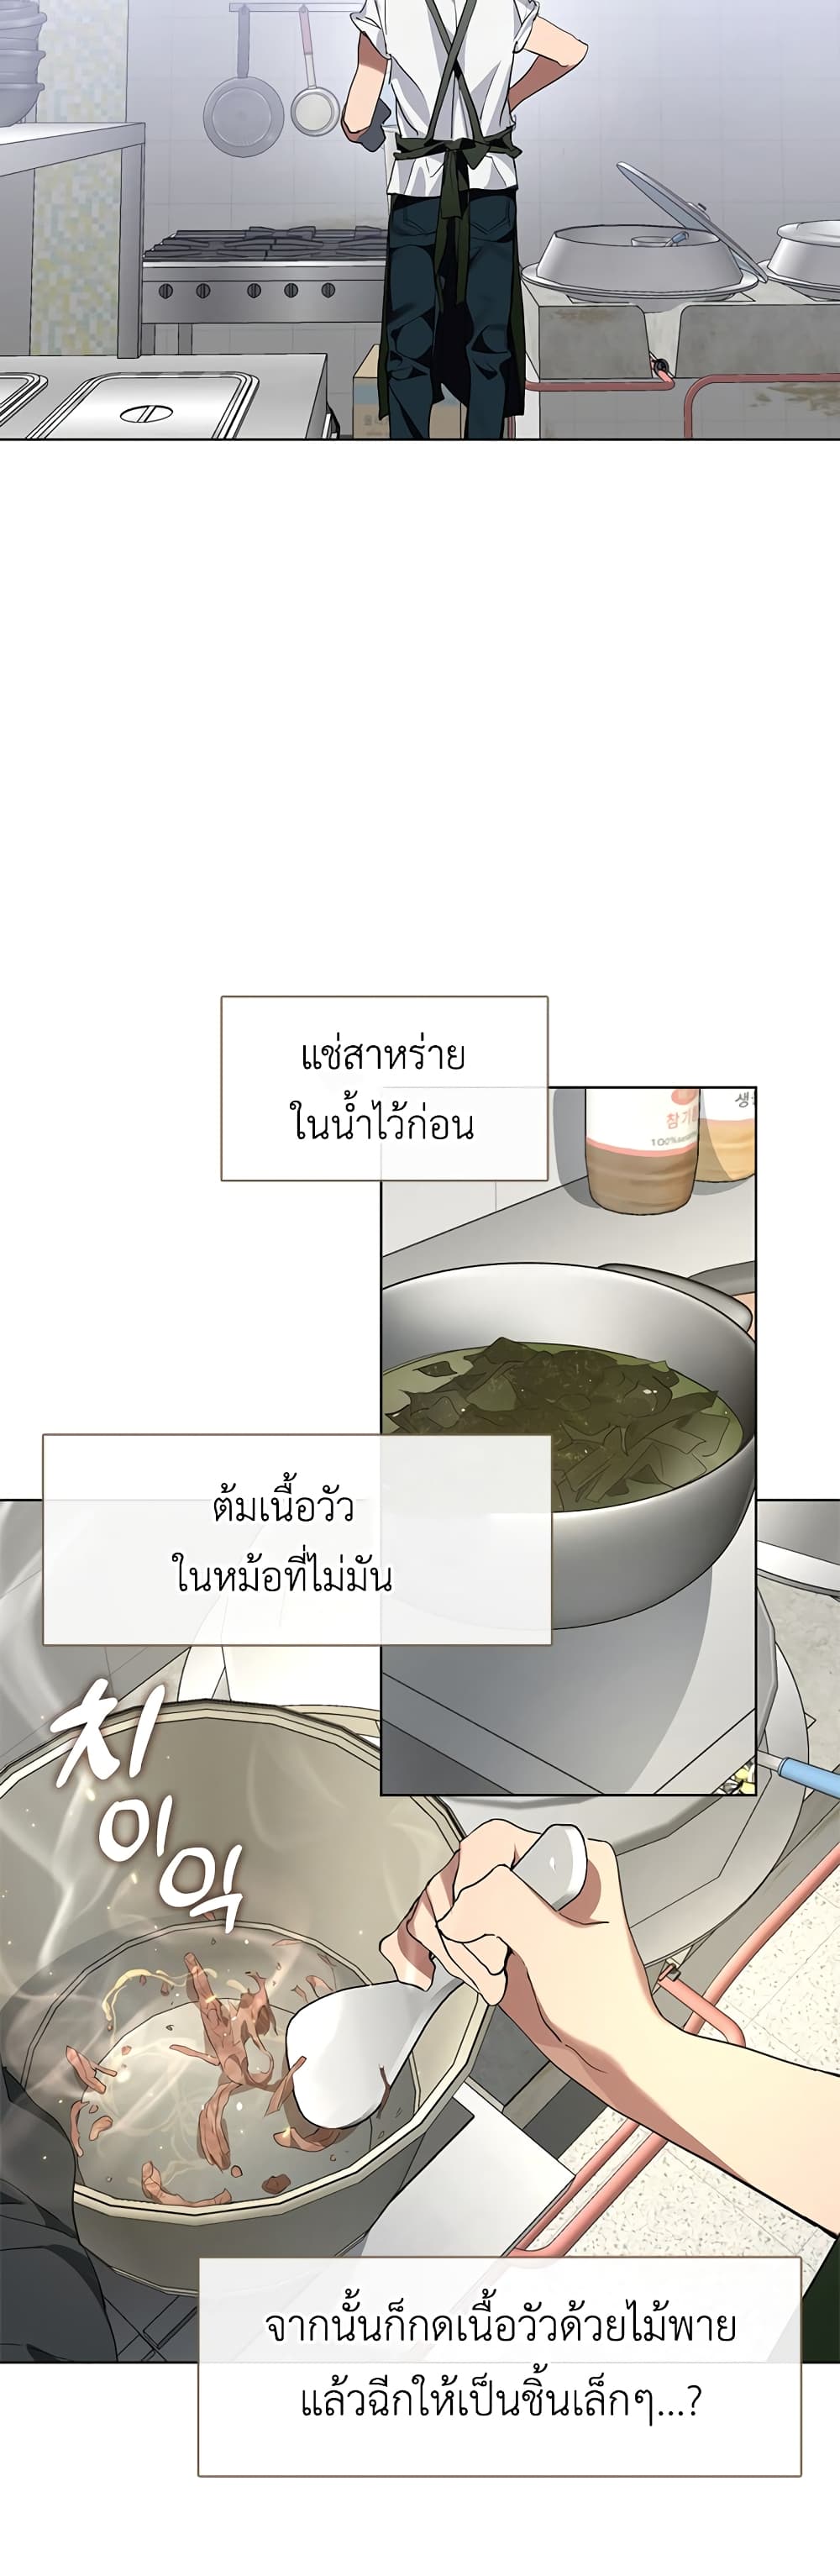 Restaurant in the After Life ตอนที่ 7 (36)